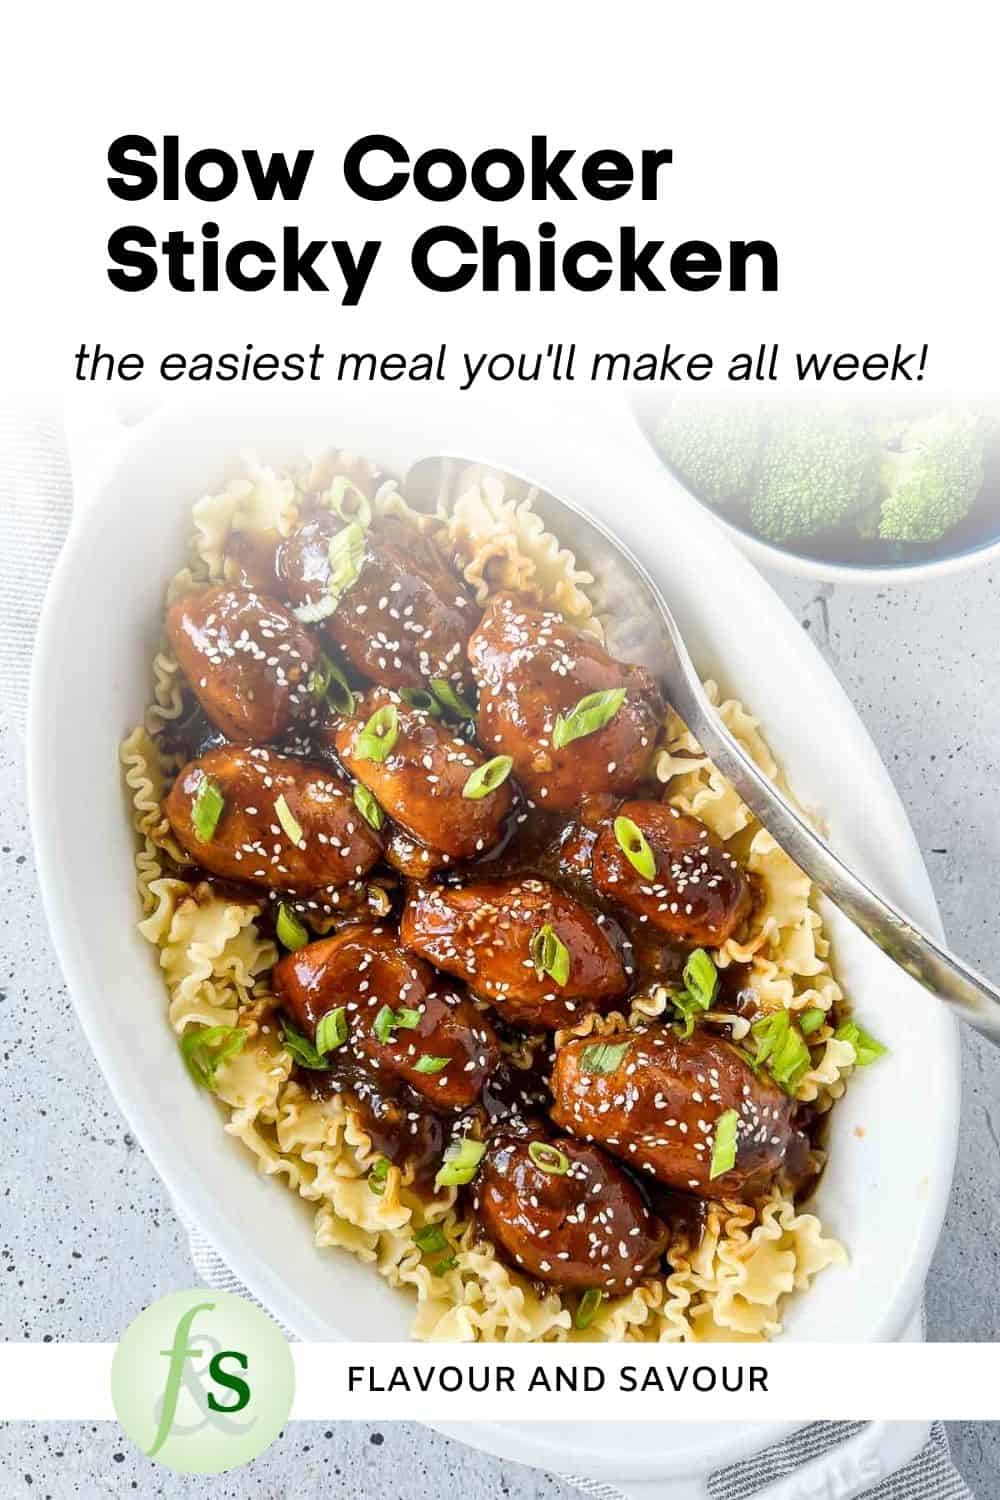 Image with text overlay for Slow Cooker Sticky Chicken.